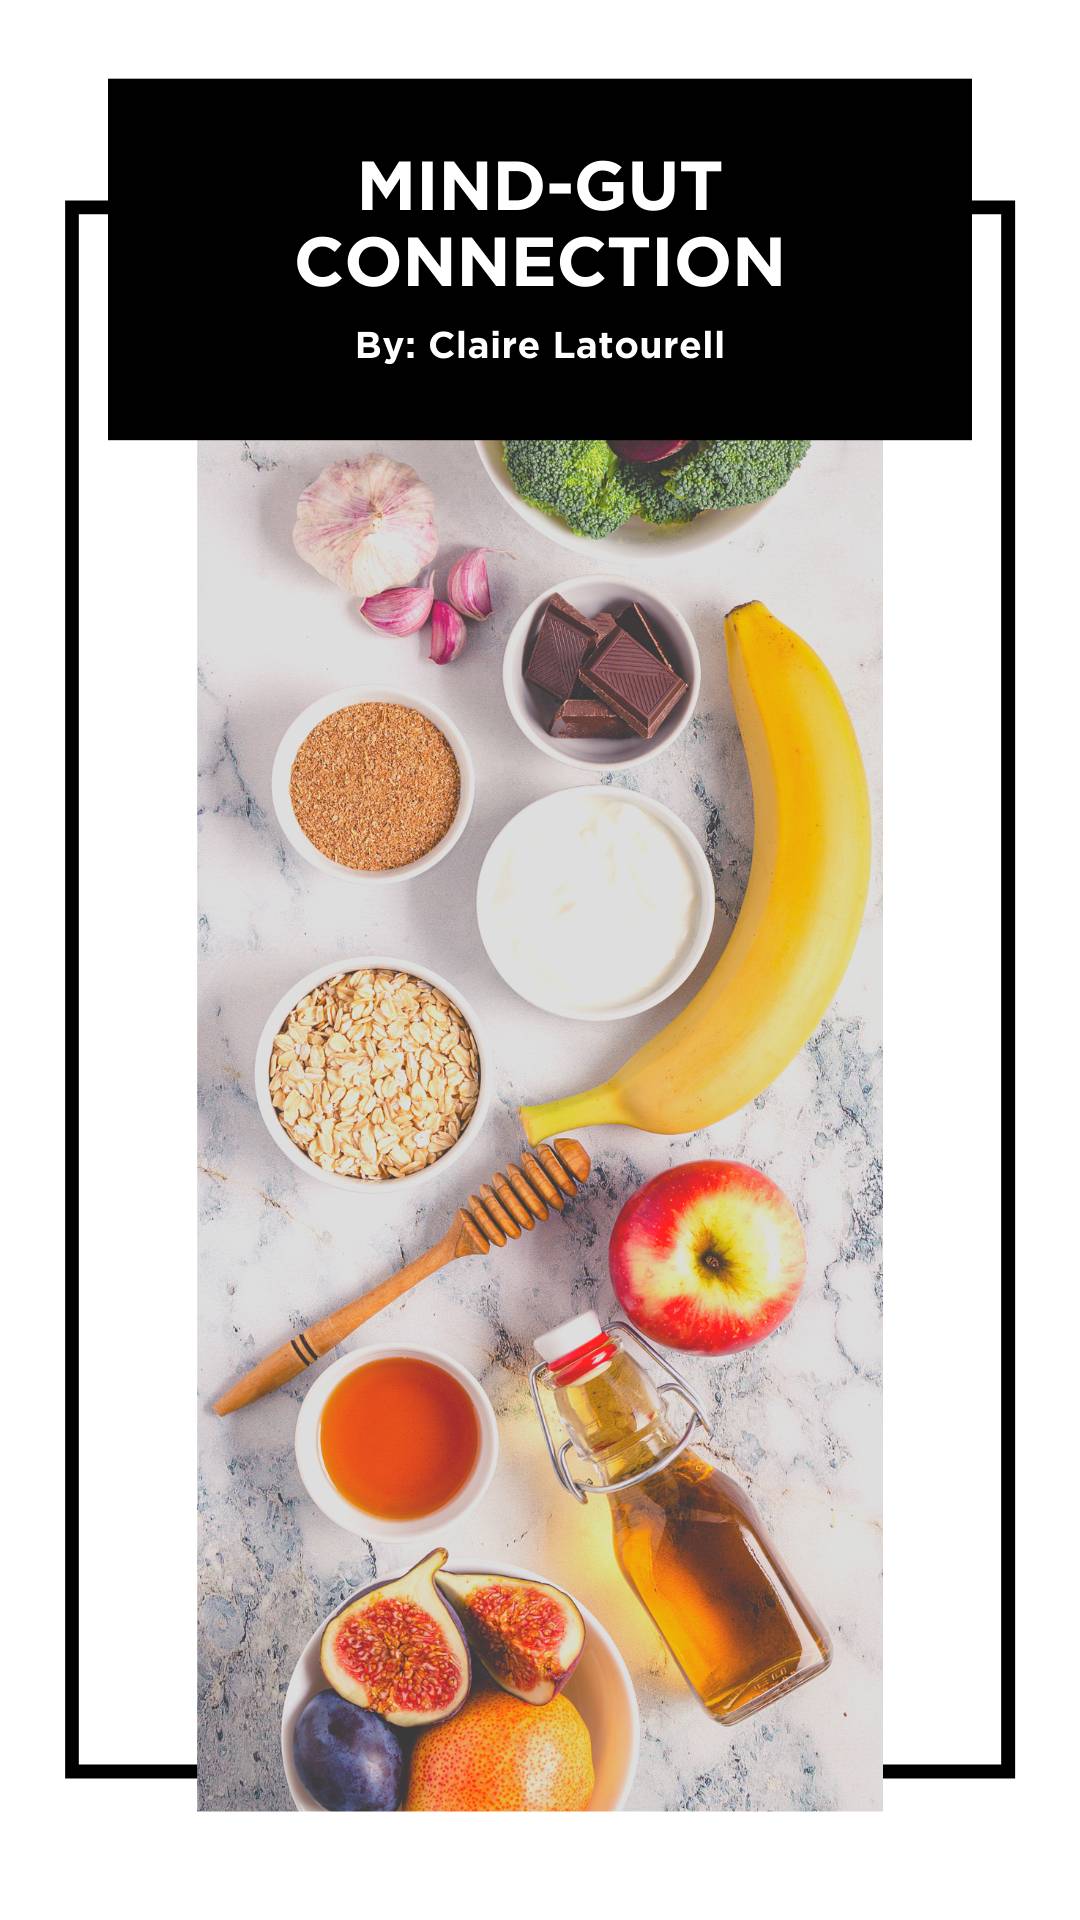 Image of a title page that says Mind-Gut Connection with a picture of healthy foods for your gut like honey, bananas and broccoli.